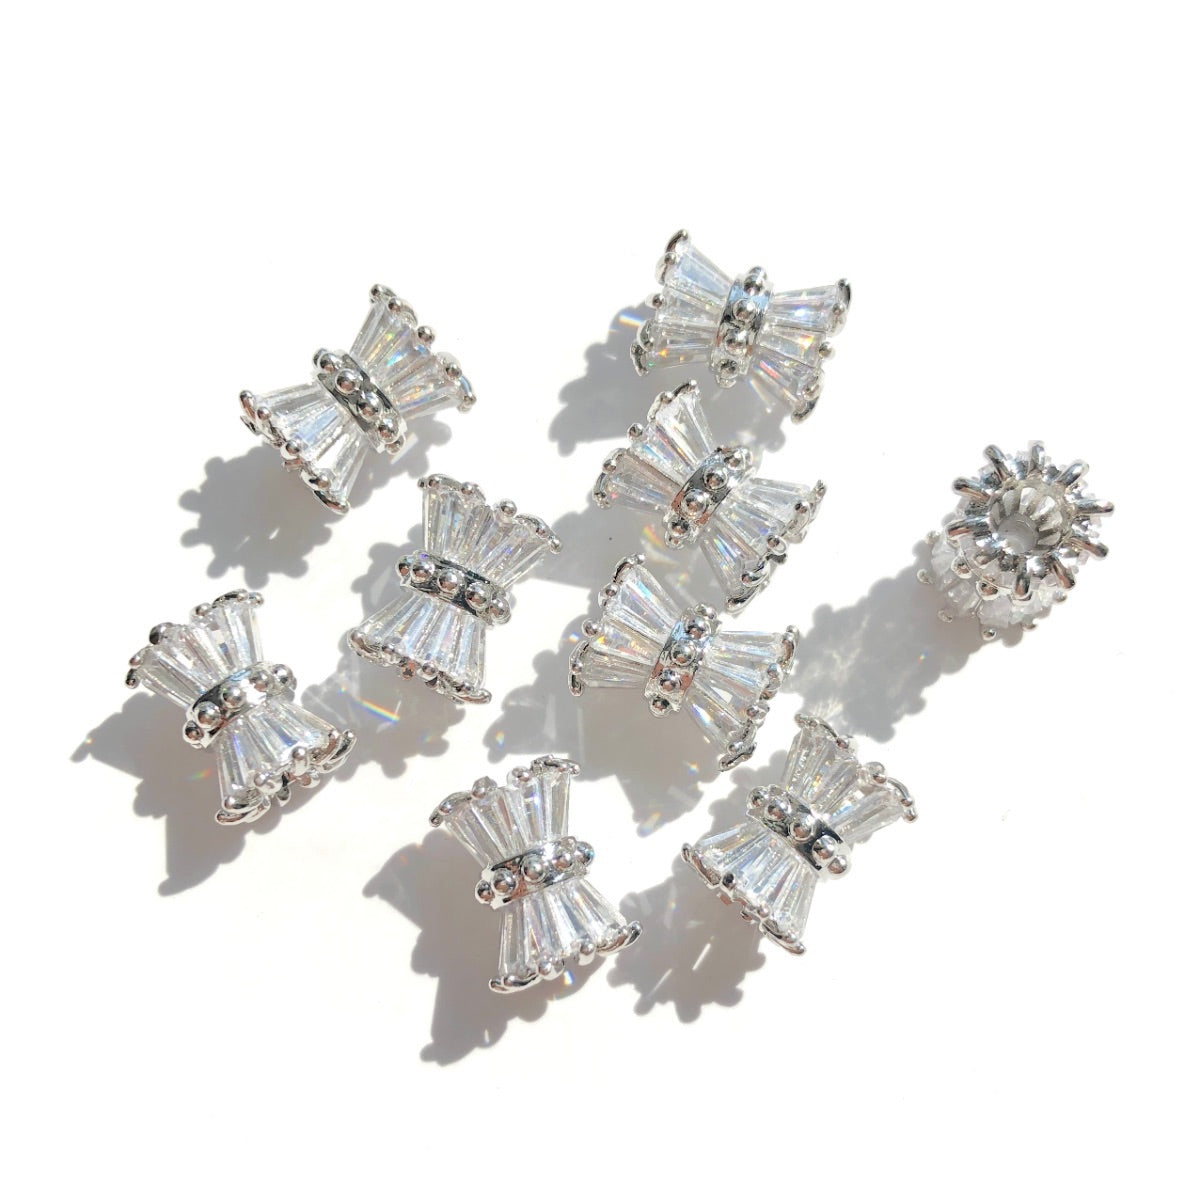 10pcs/lot 11.5*9mm CZ Paved Hourglass Spacers Silver CZ Paved Spacers Hourglass Beads New Spacers Arrivals Charms Beads Beyond